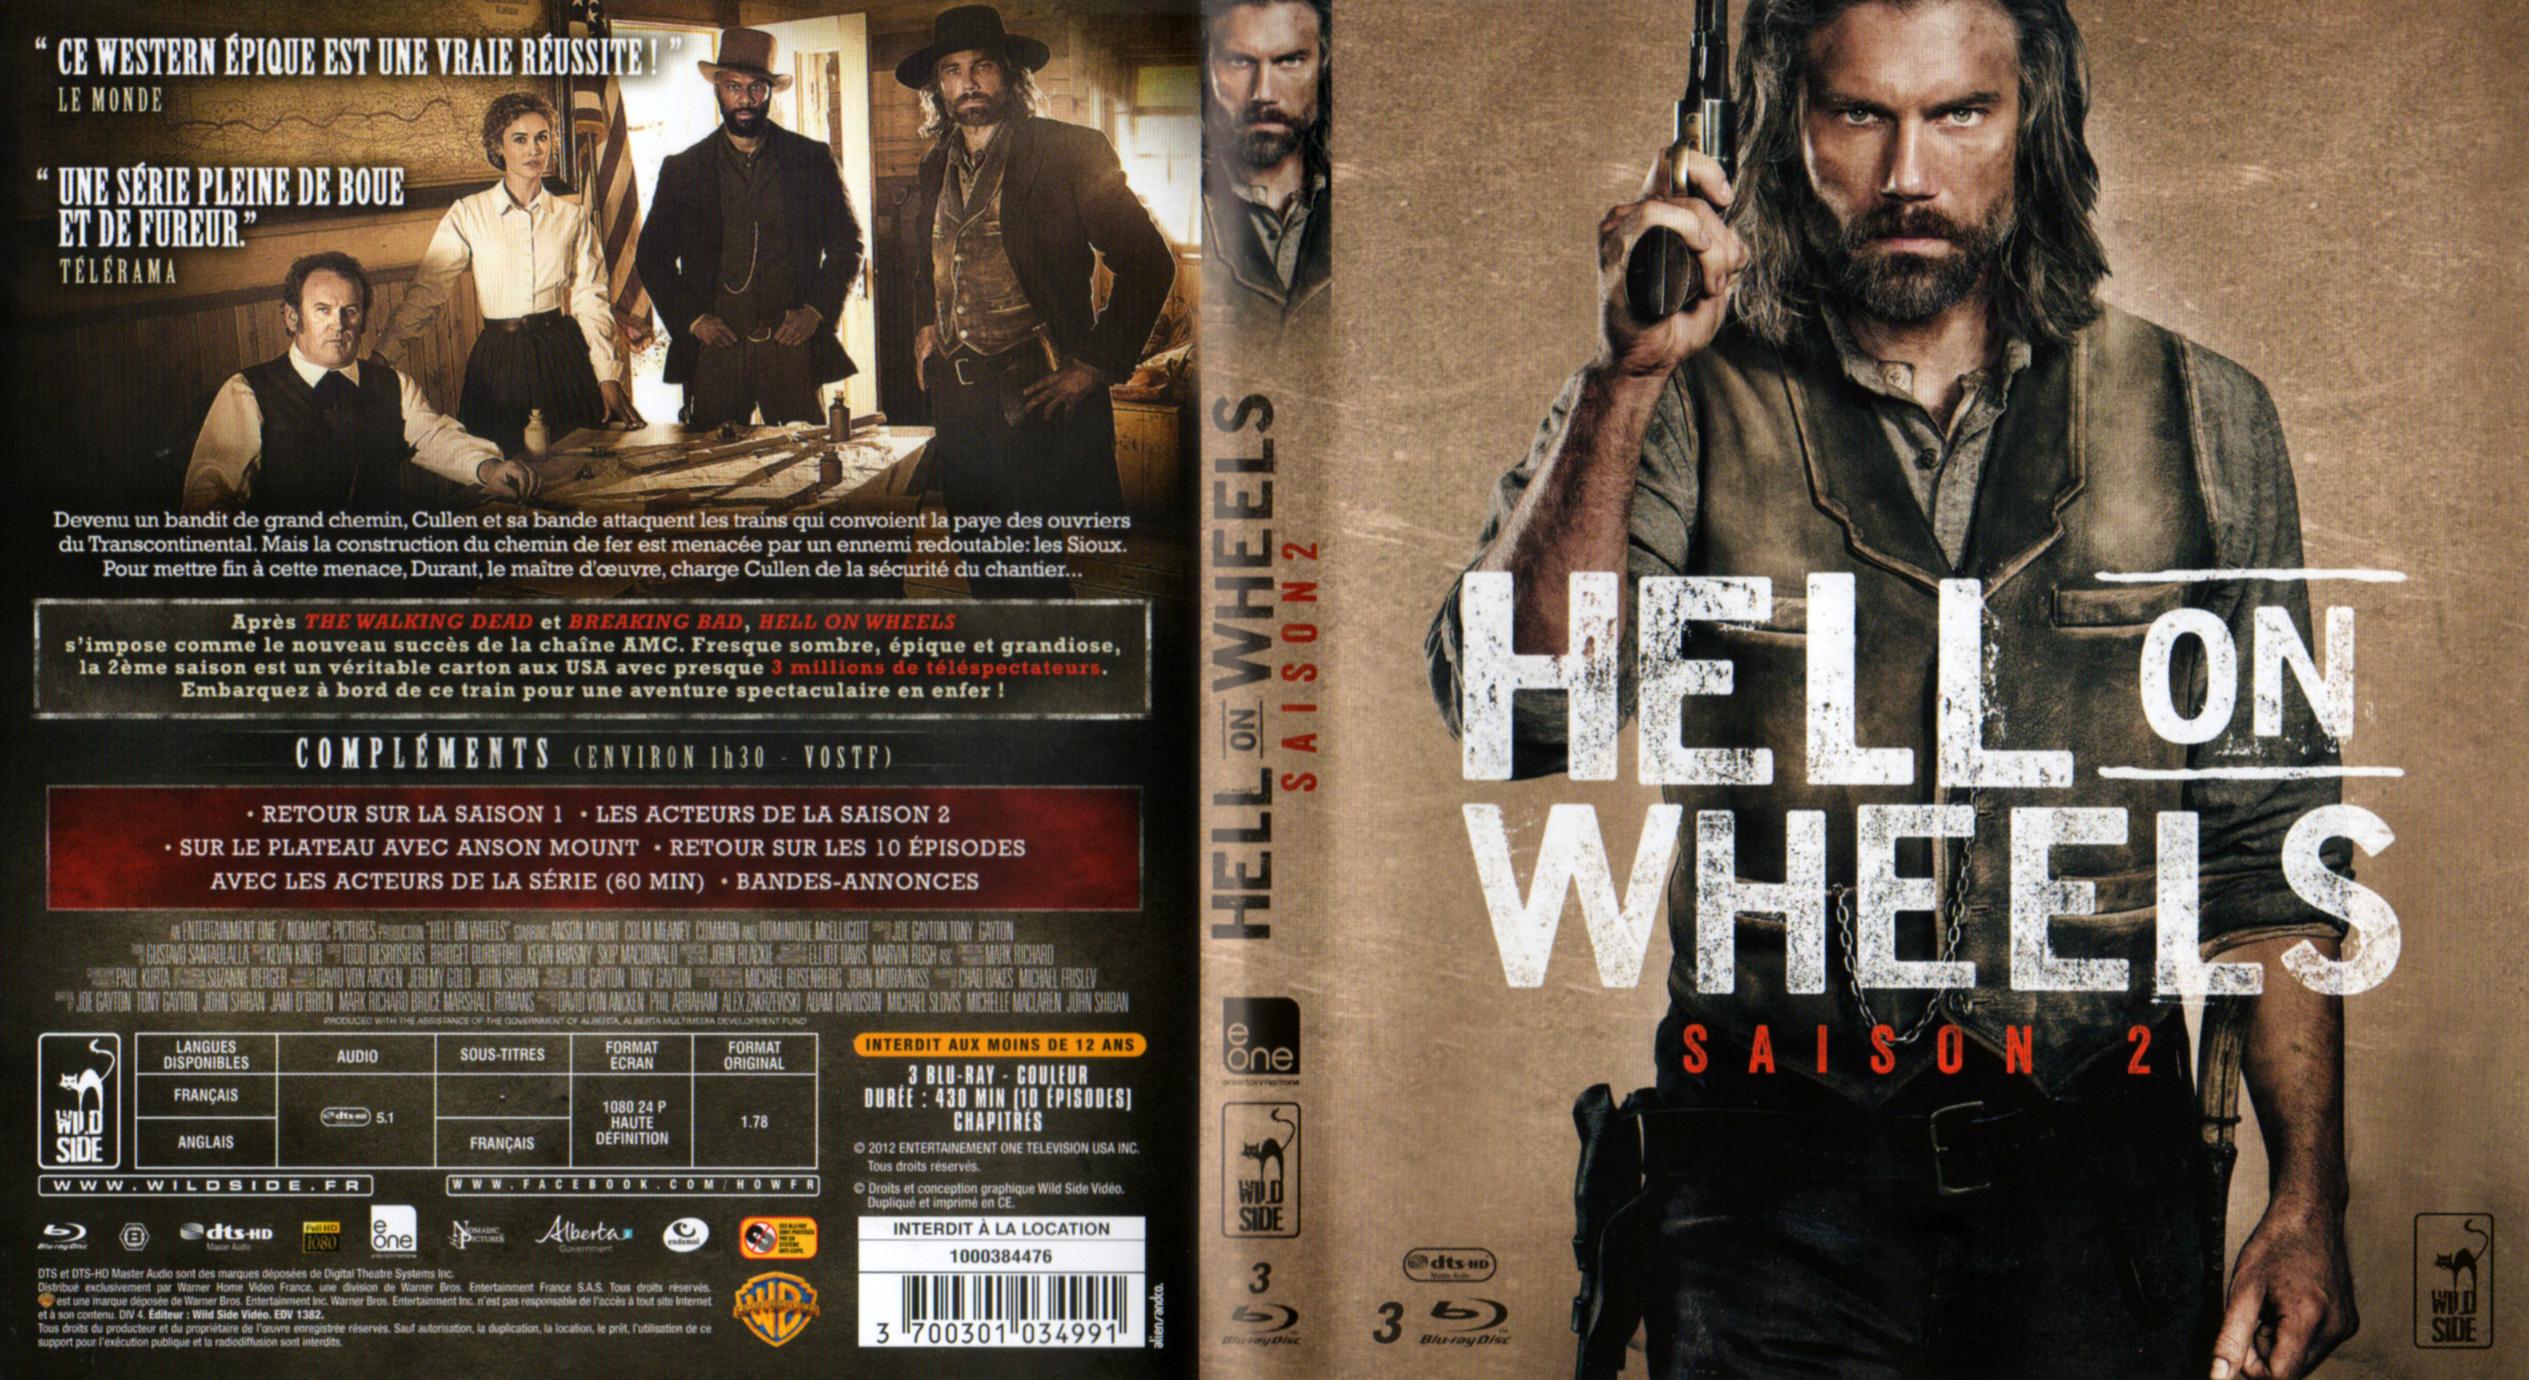 Jaquette DVD Hell on Wheels Saison 2 (BLU-RAY)